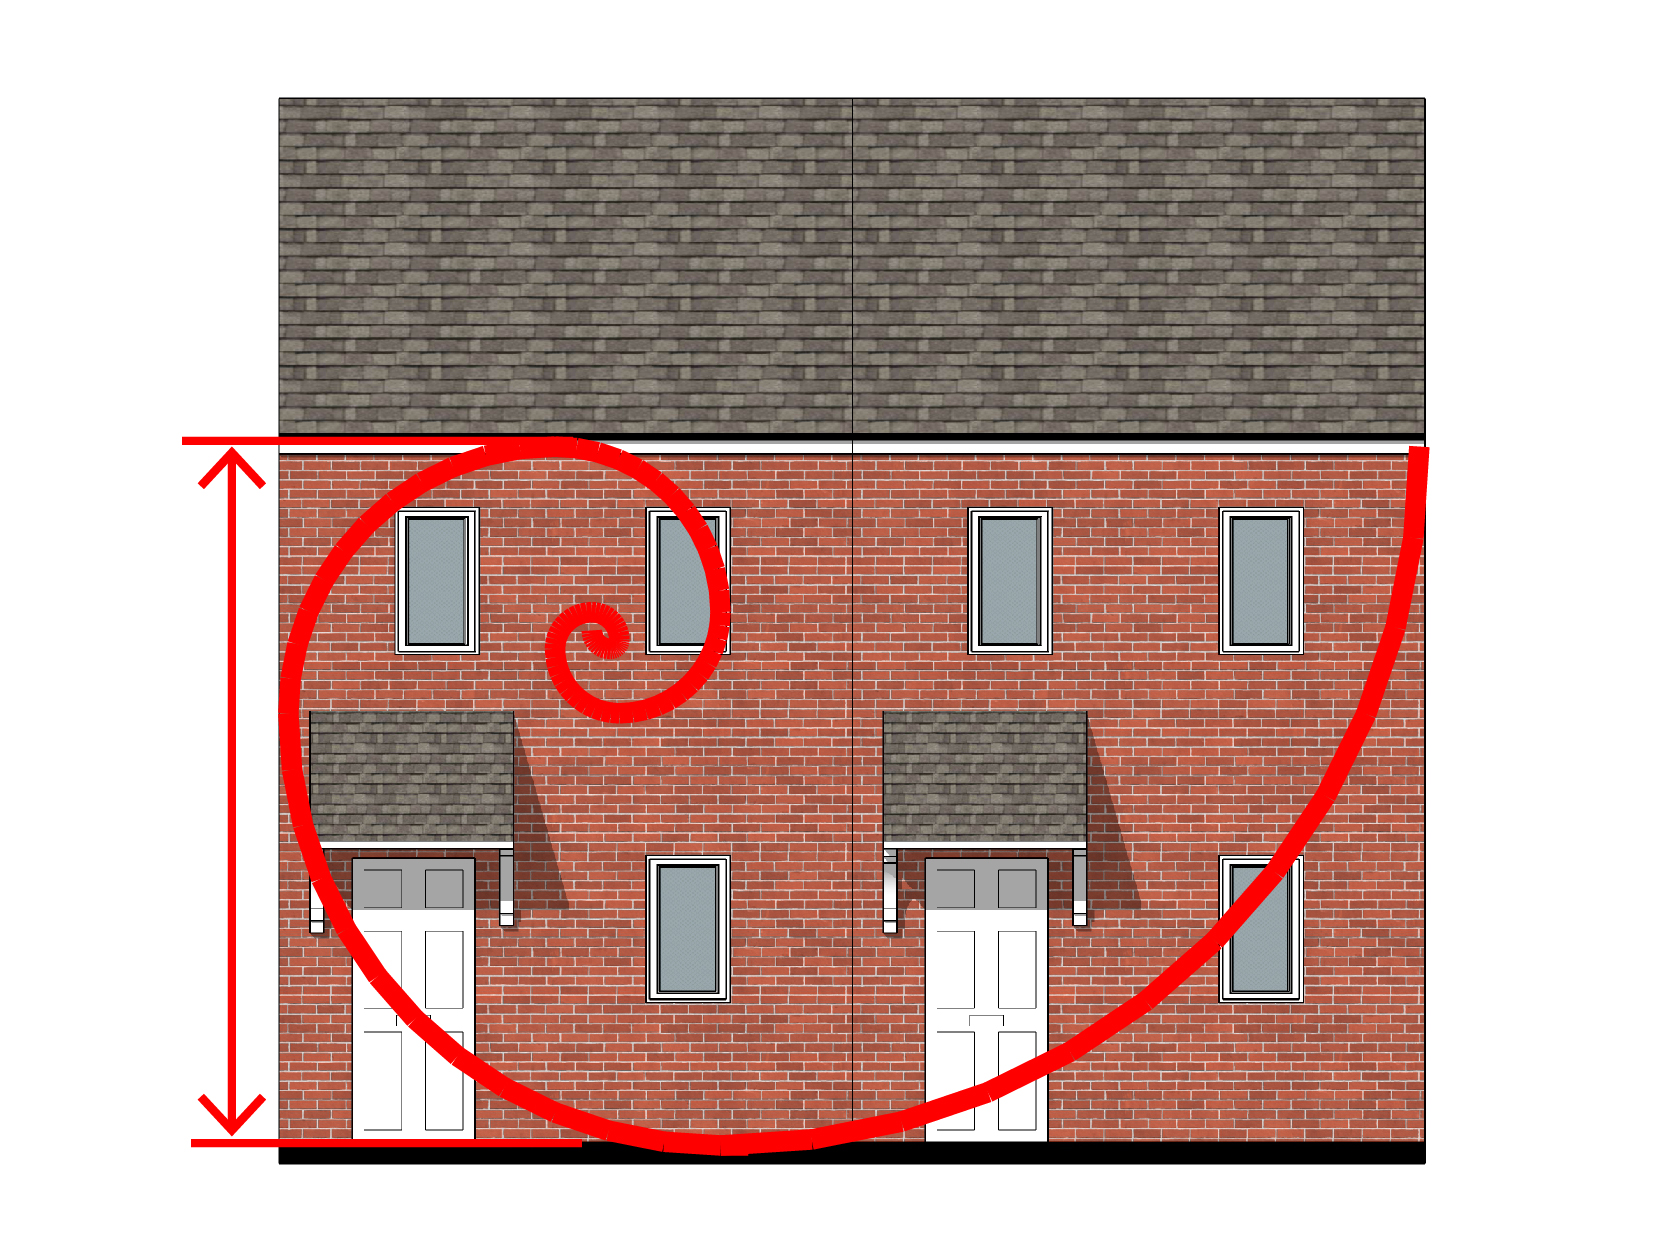 STEP 1: Increase the floor to ceiling heights to raise the eaves line to create better proportion